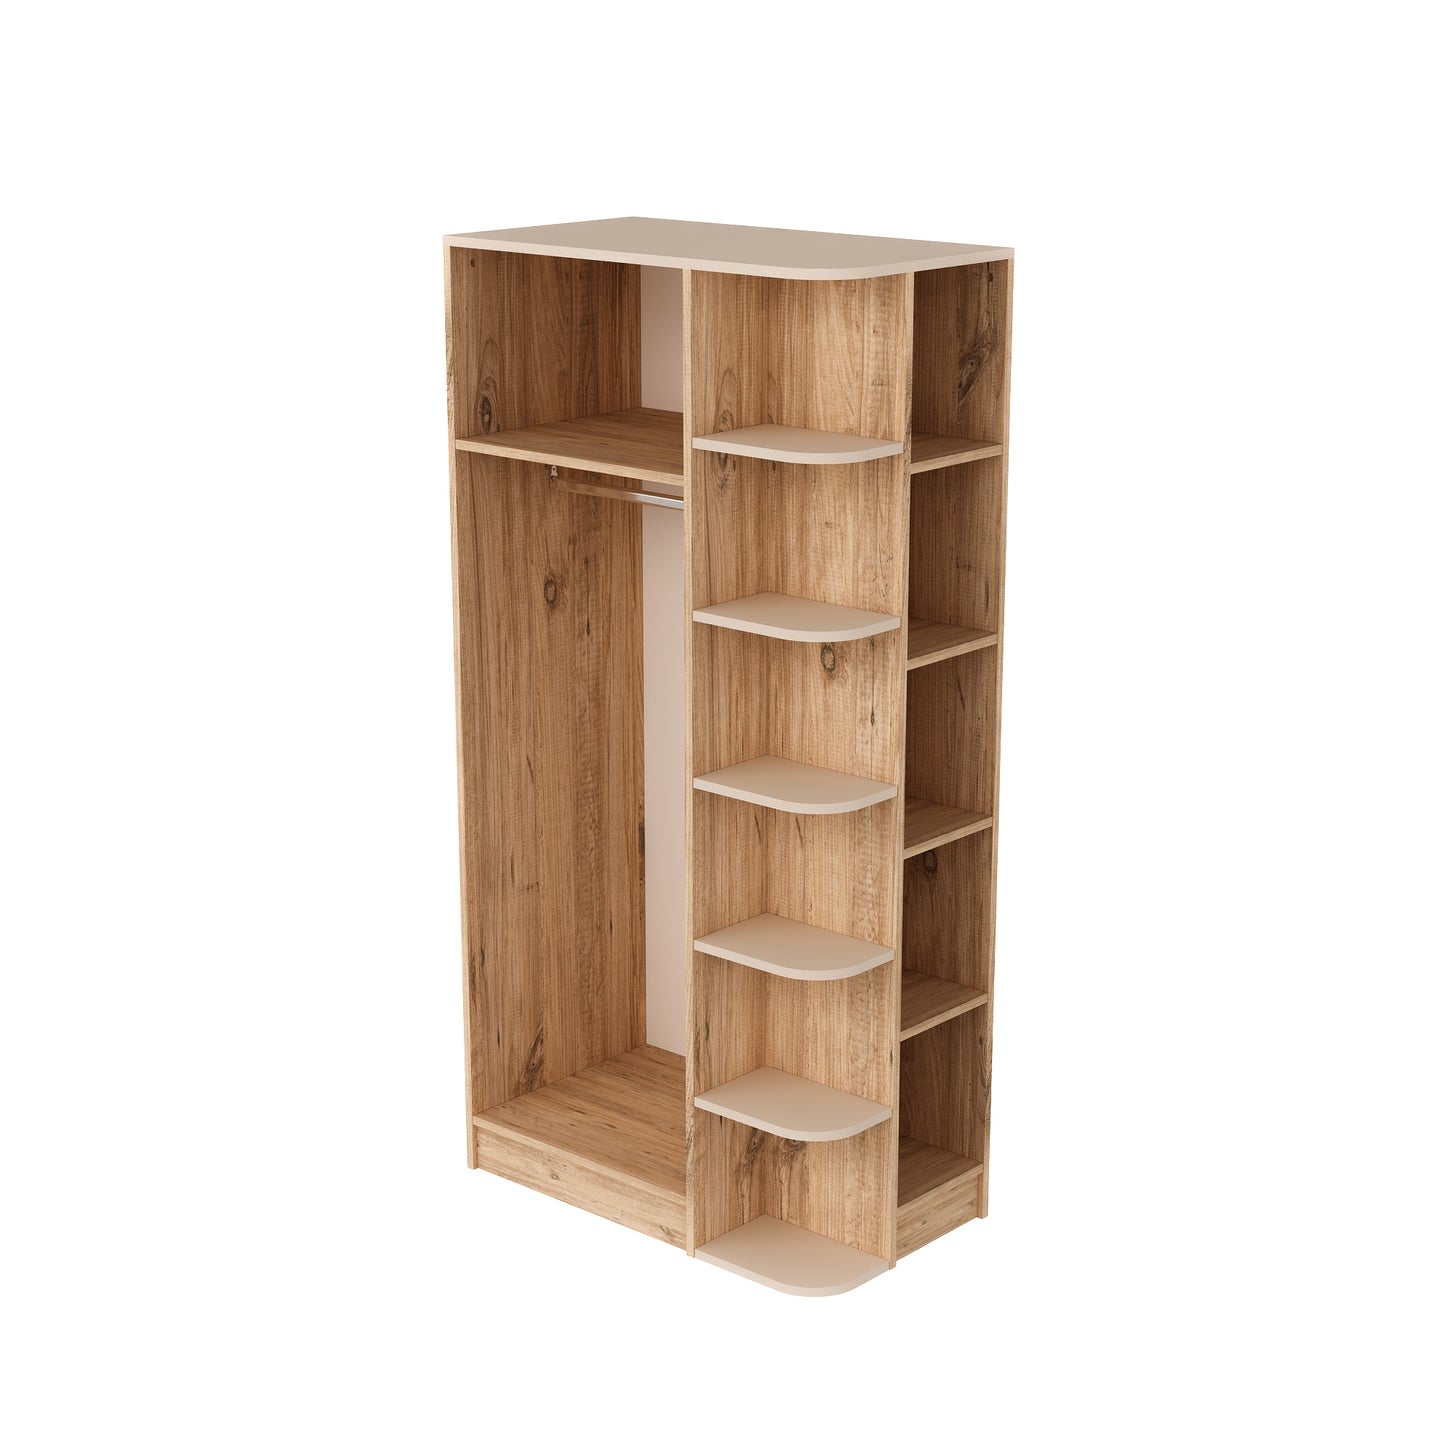 Lelia Compact Wardrobe with Cabinets and Shelves